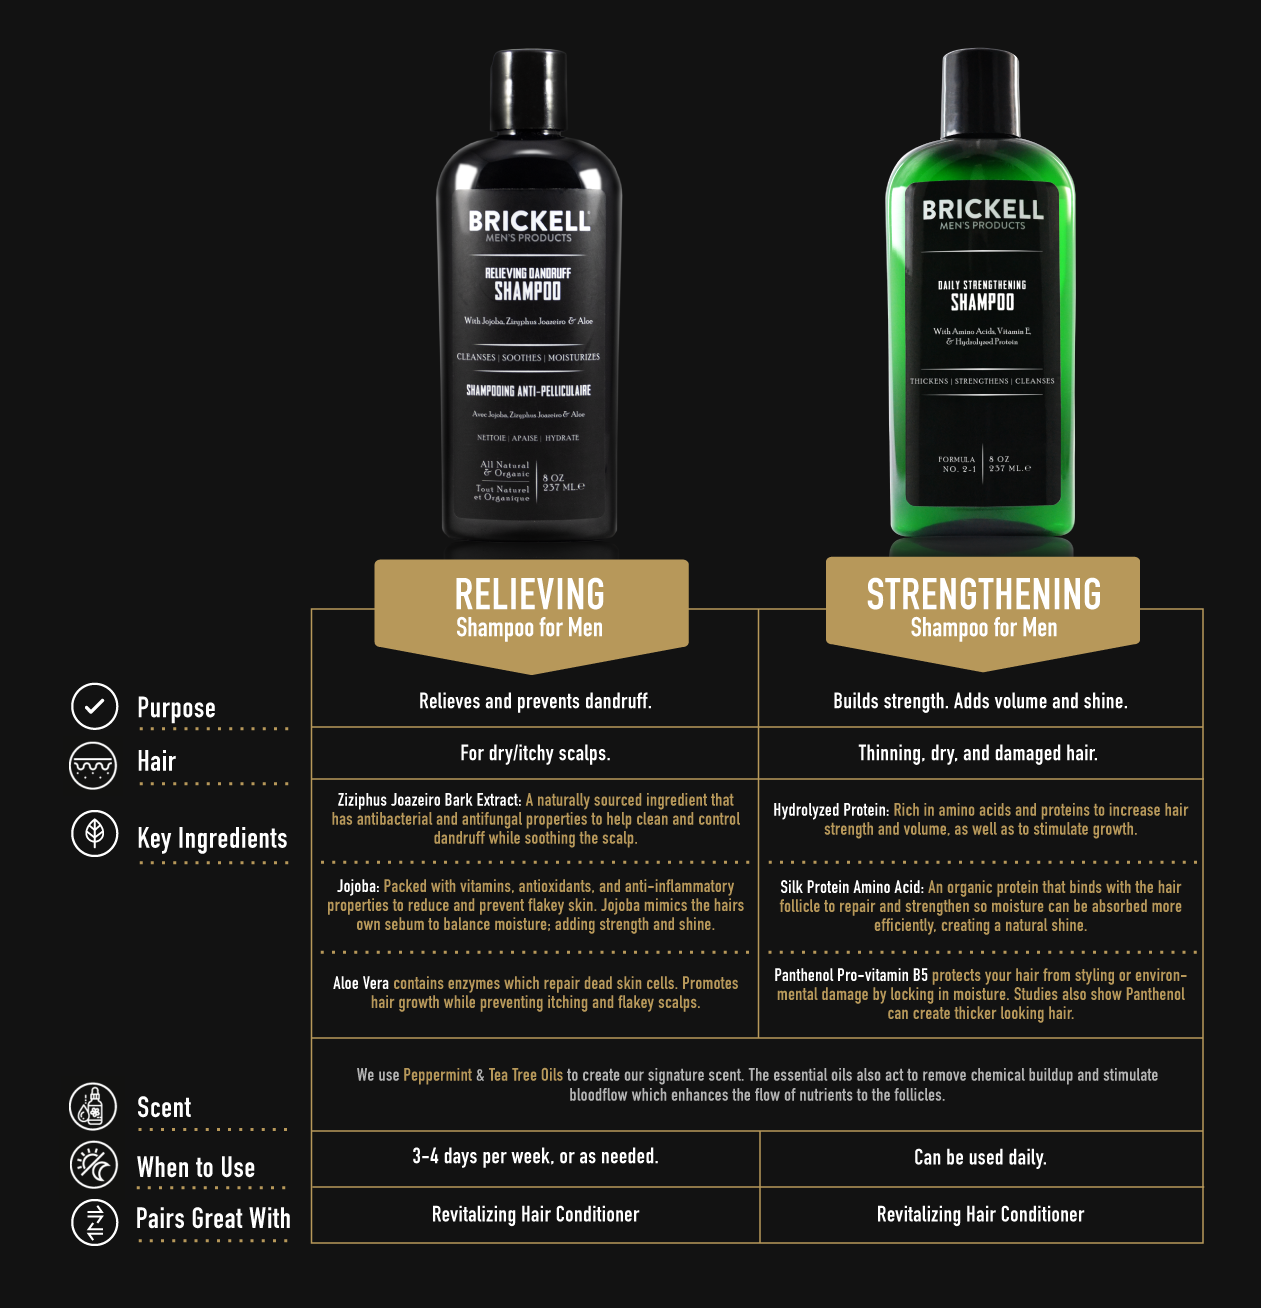 Brickell Men's Products Relieving Dandruff Shampoo, Compare Shampoos, Best Shampoo for Men, Natural Shampoo, Mens Hair